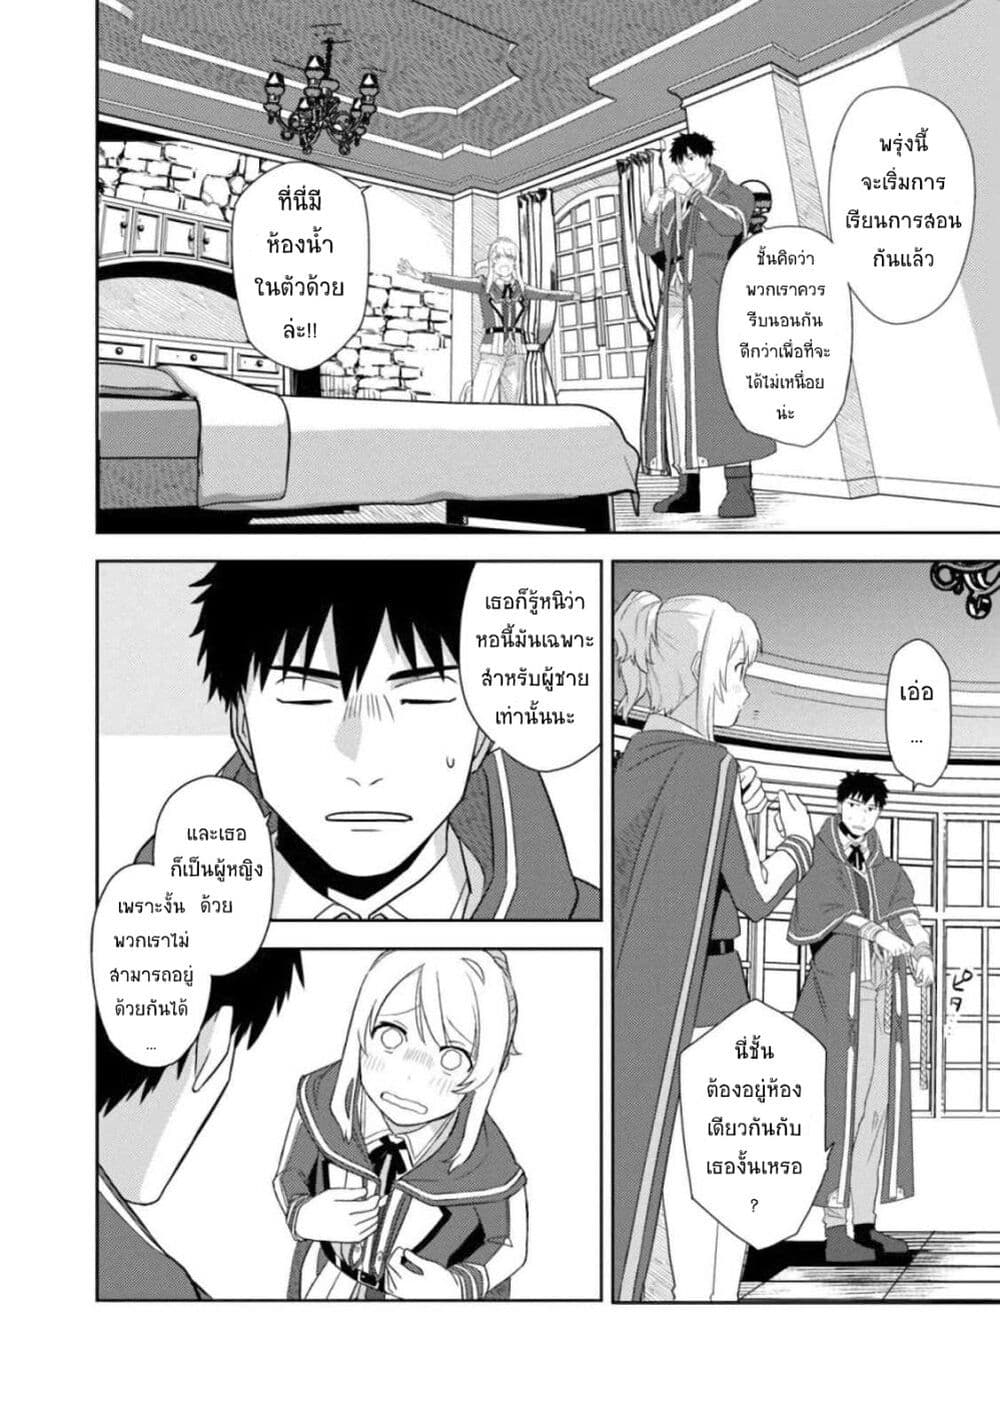 The Reincarnated Swordsman With 9999 Strength Wants to Become a Magician! ตอนที่ 2.2 (2)